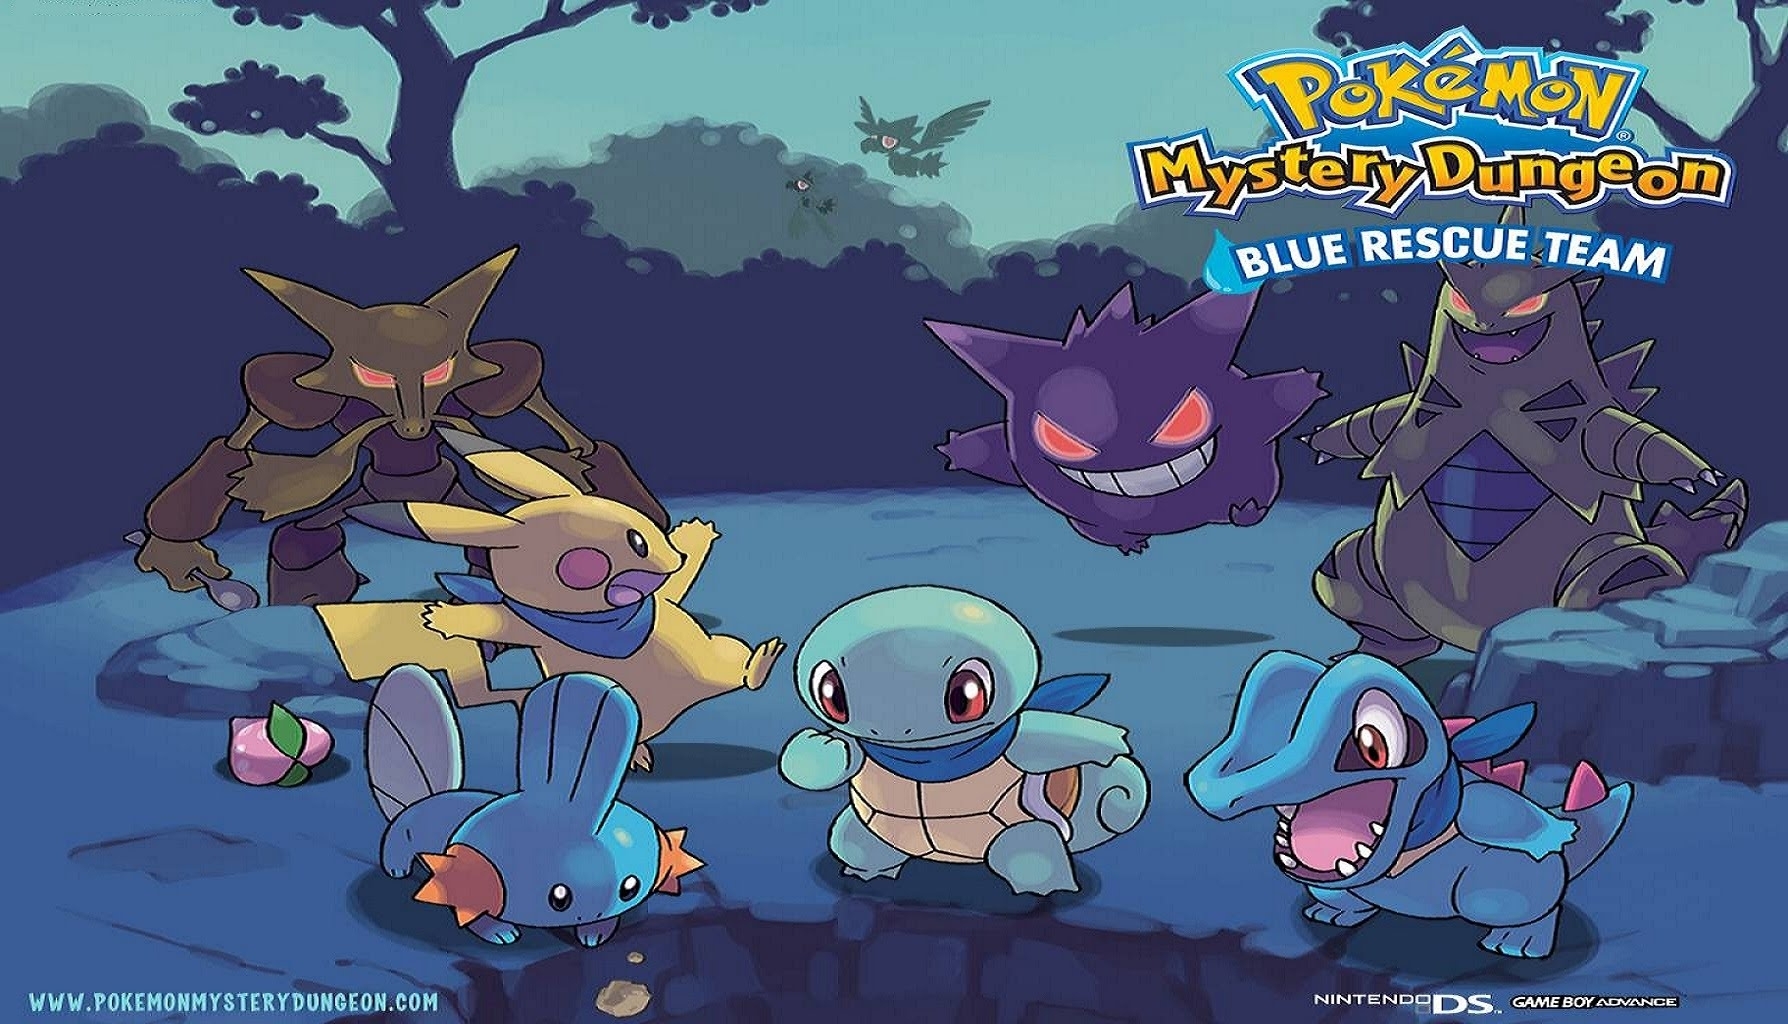 10 Best Pokemon Mystery Dungeon Backgrounds FULL HD 1920×1080 For PC